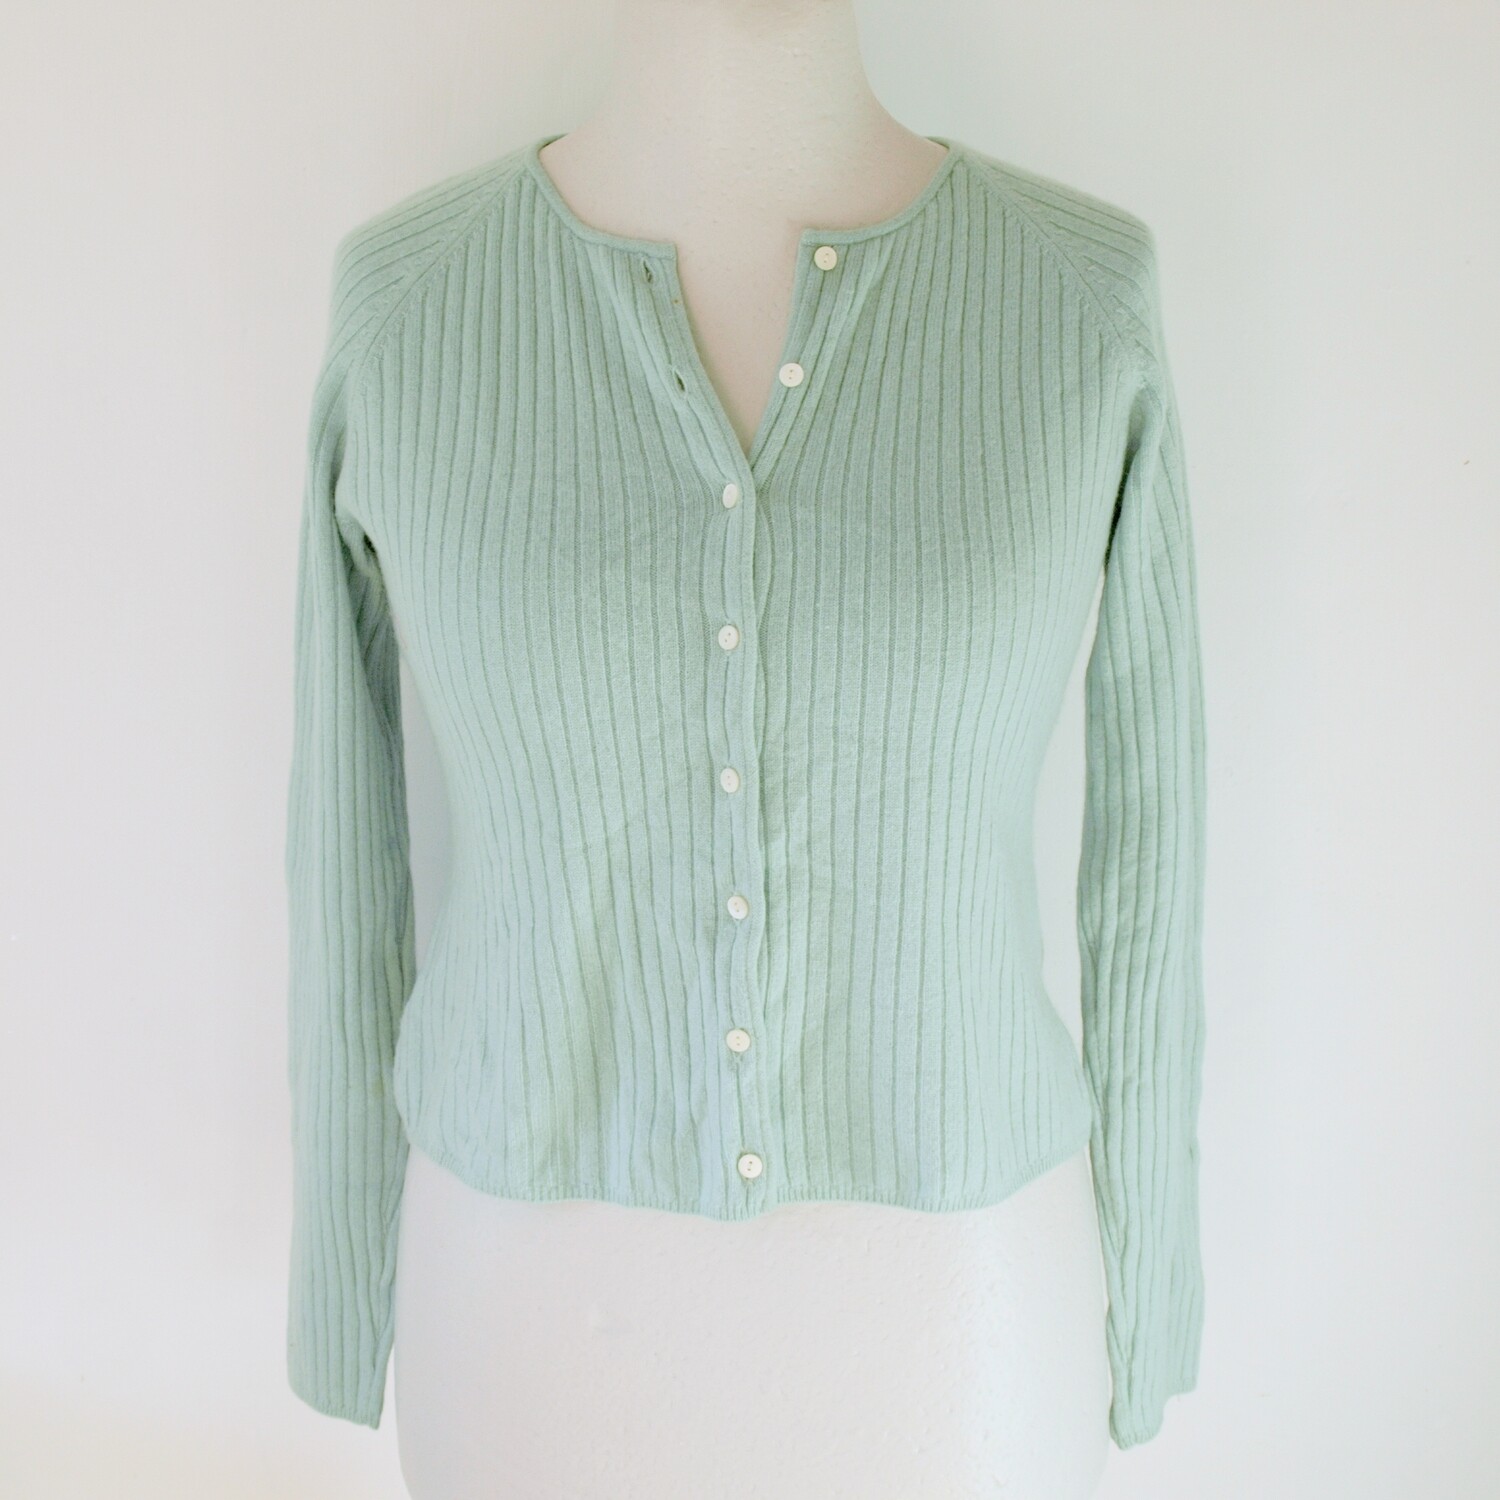 Ladies 100% Cashmere Cardigan by Deane & White - Size M